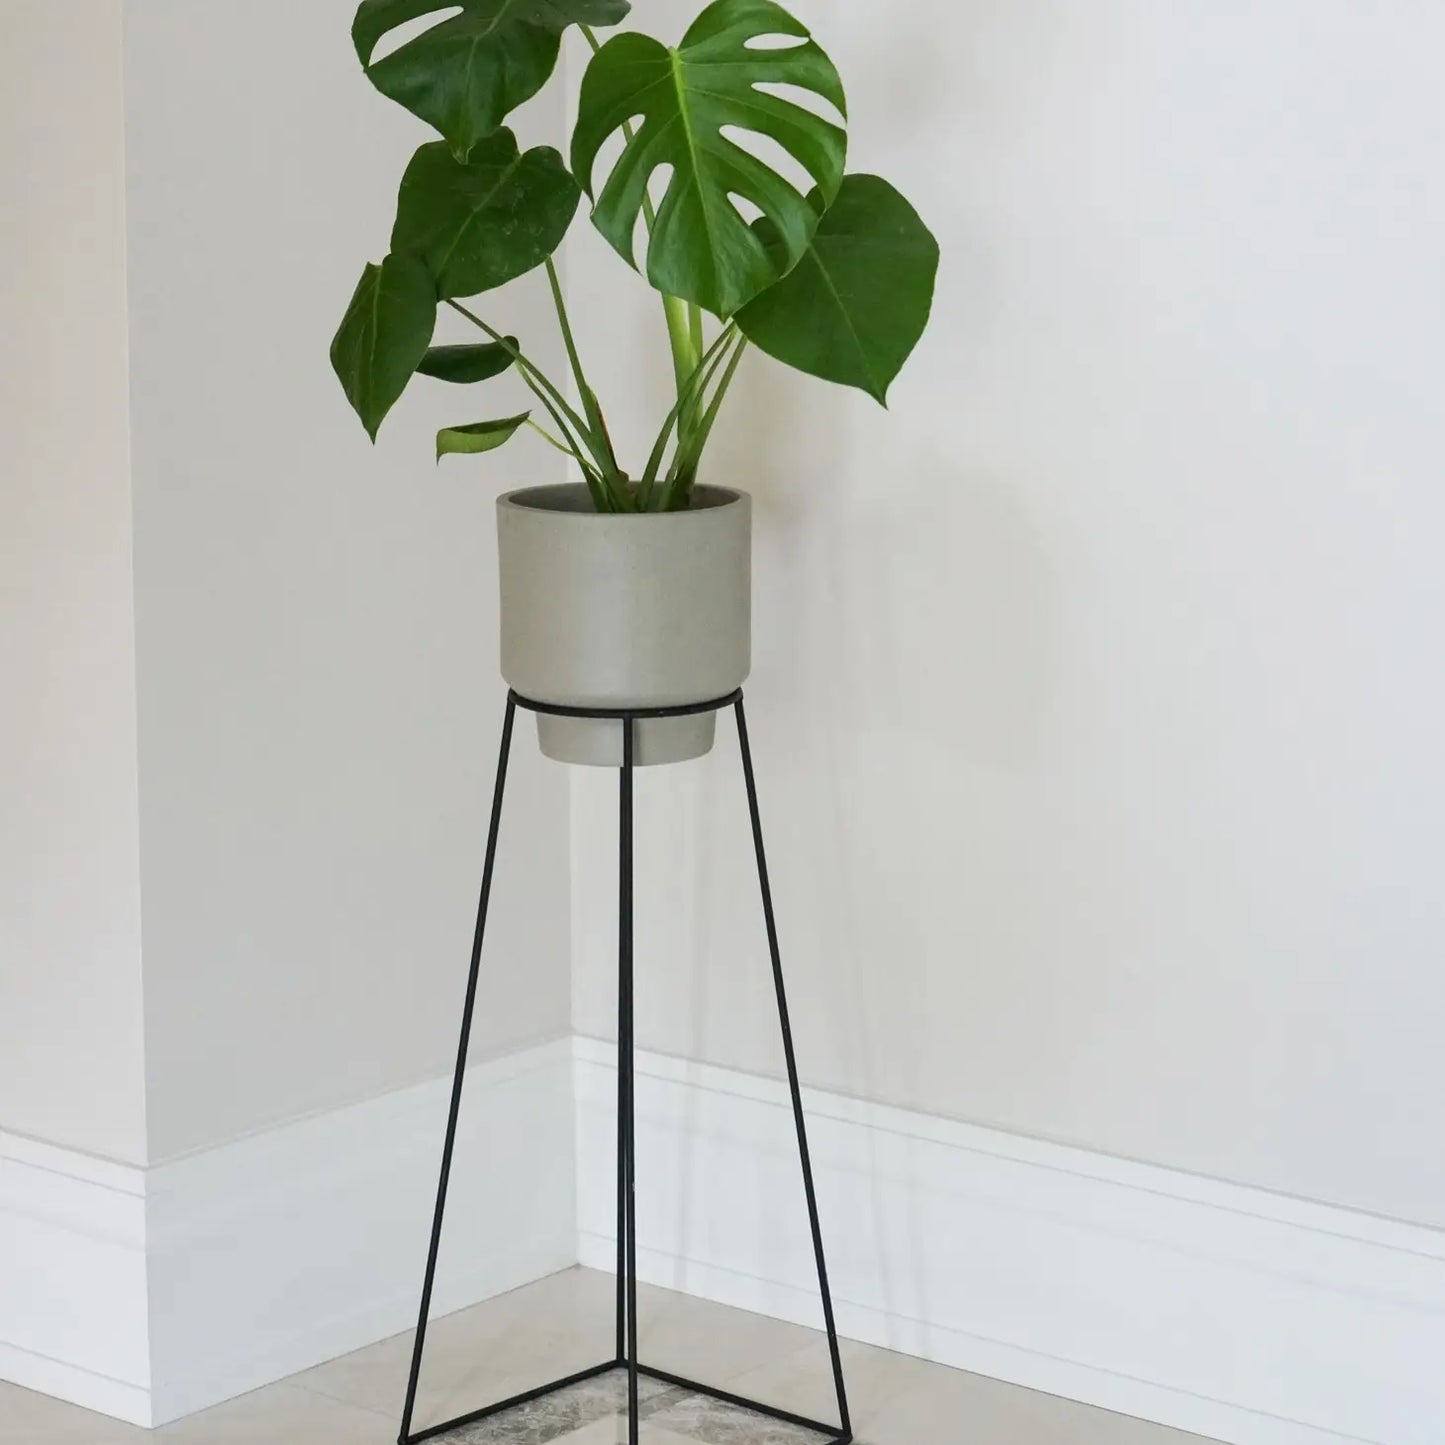 Minimo Plant Stand in Black